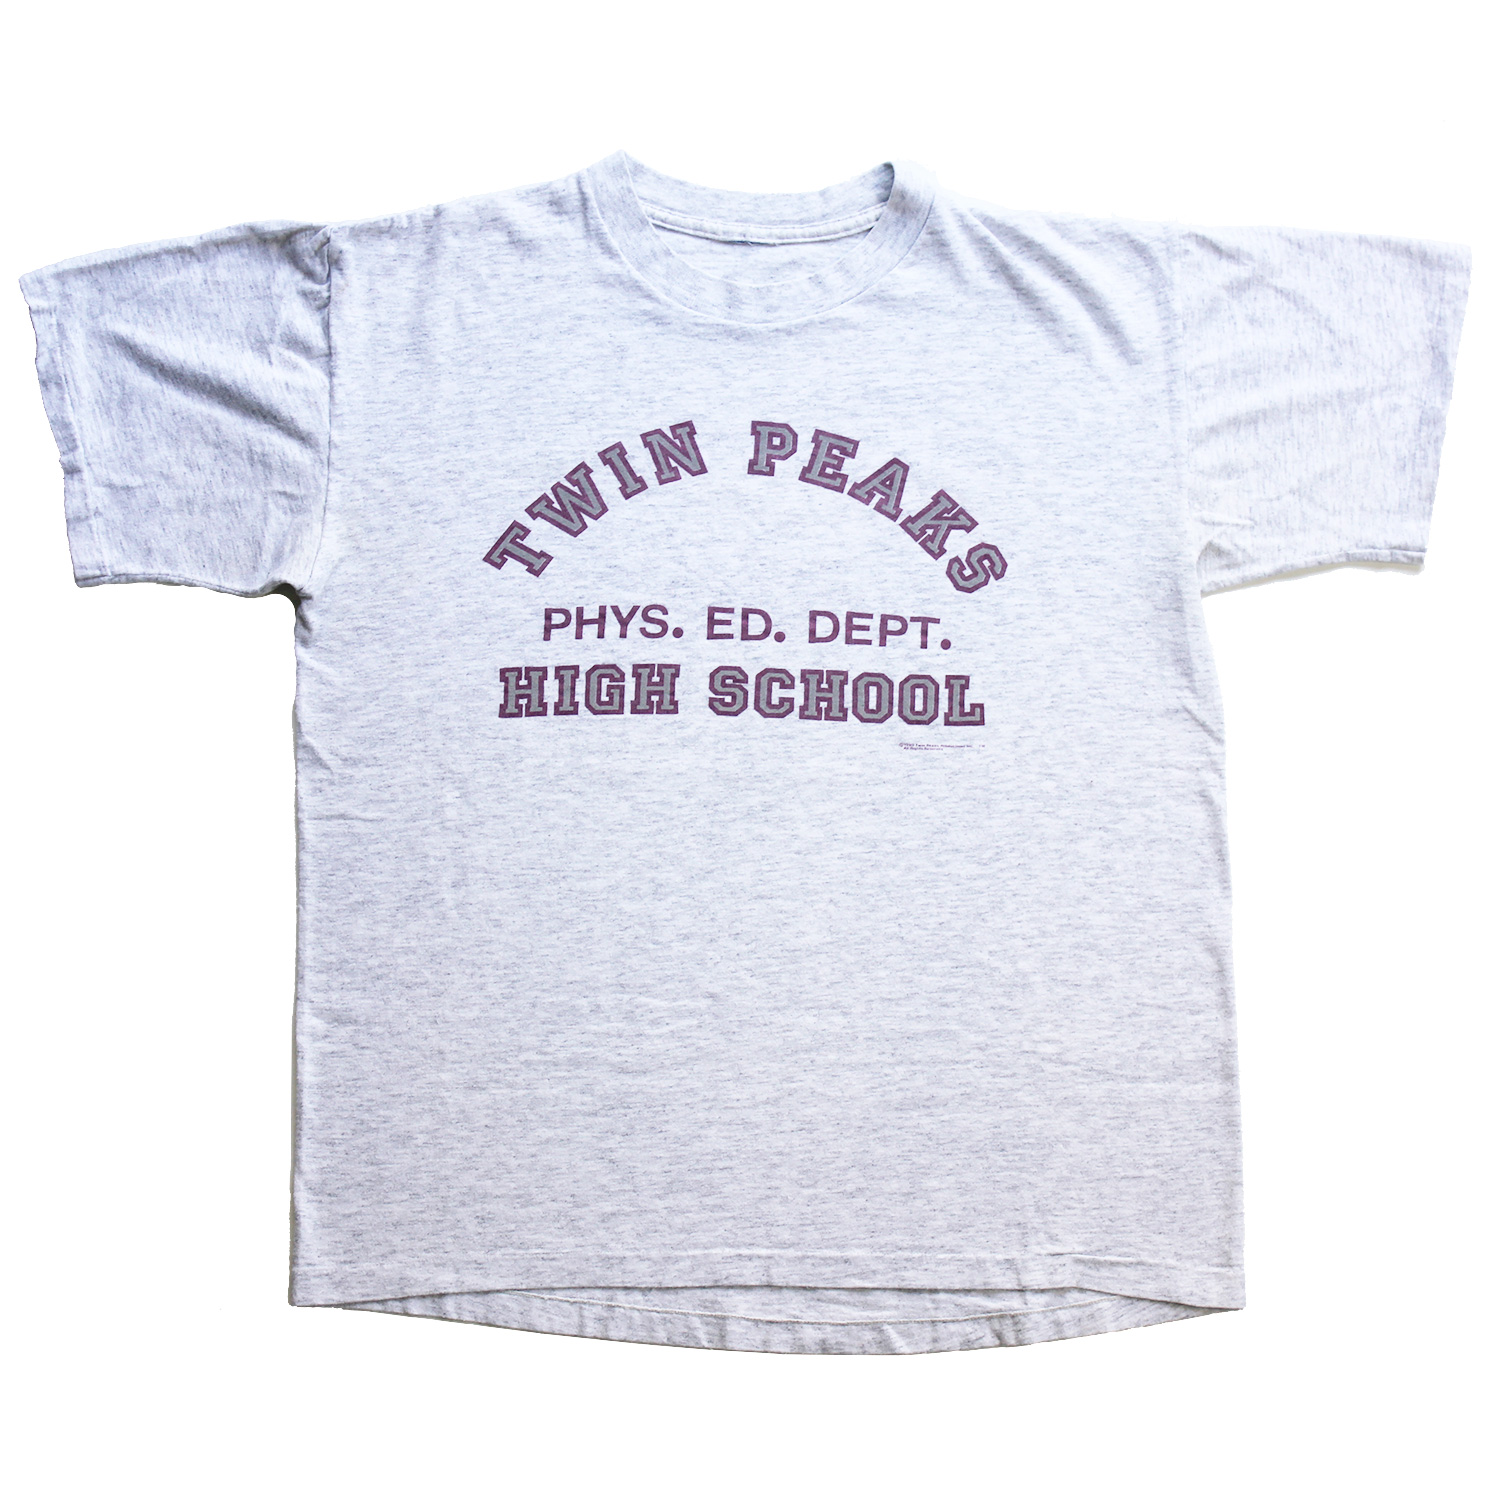 Vintage Twin Peaks High School T-shirt without Neck Tag, Front